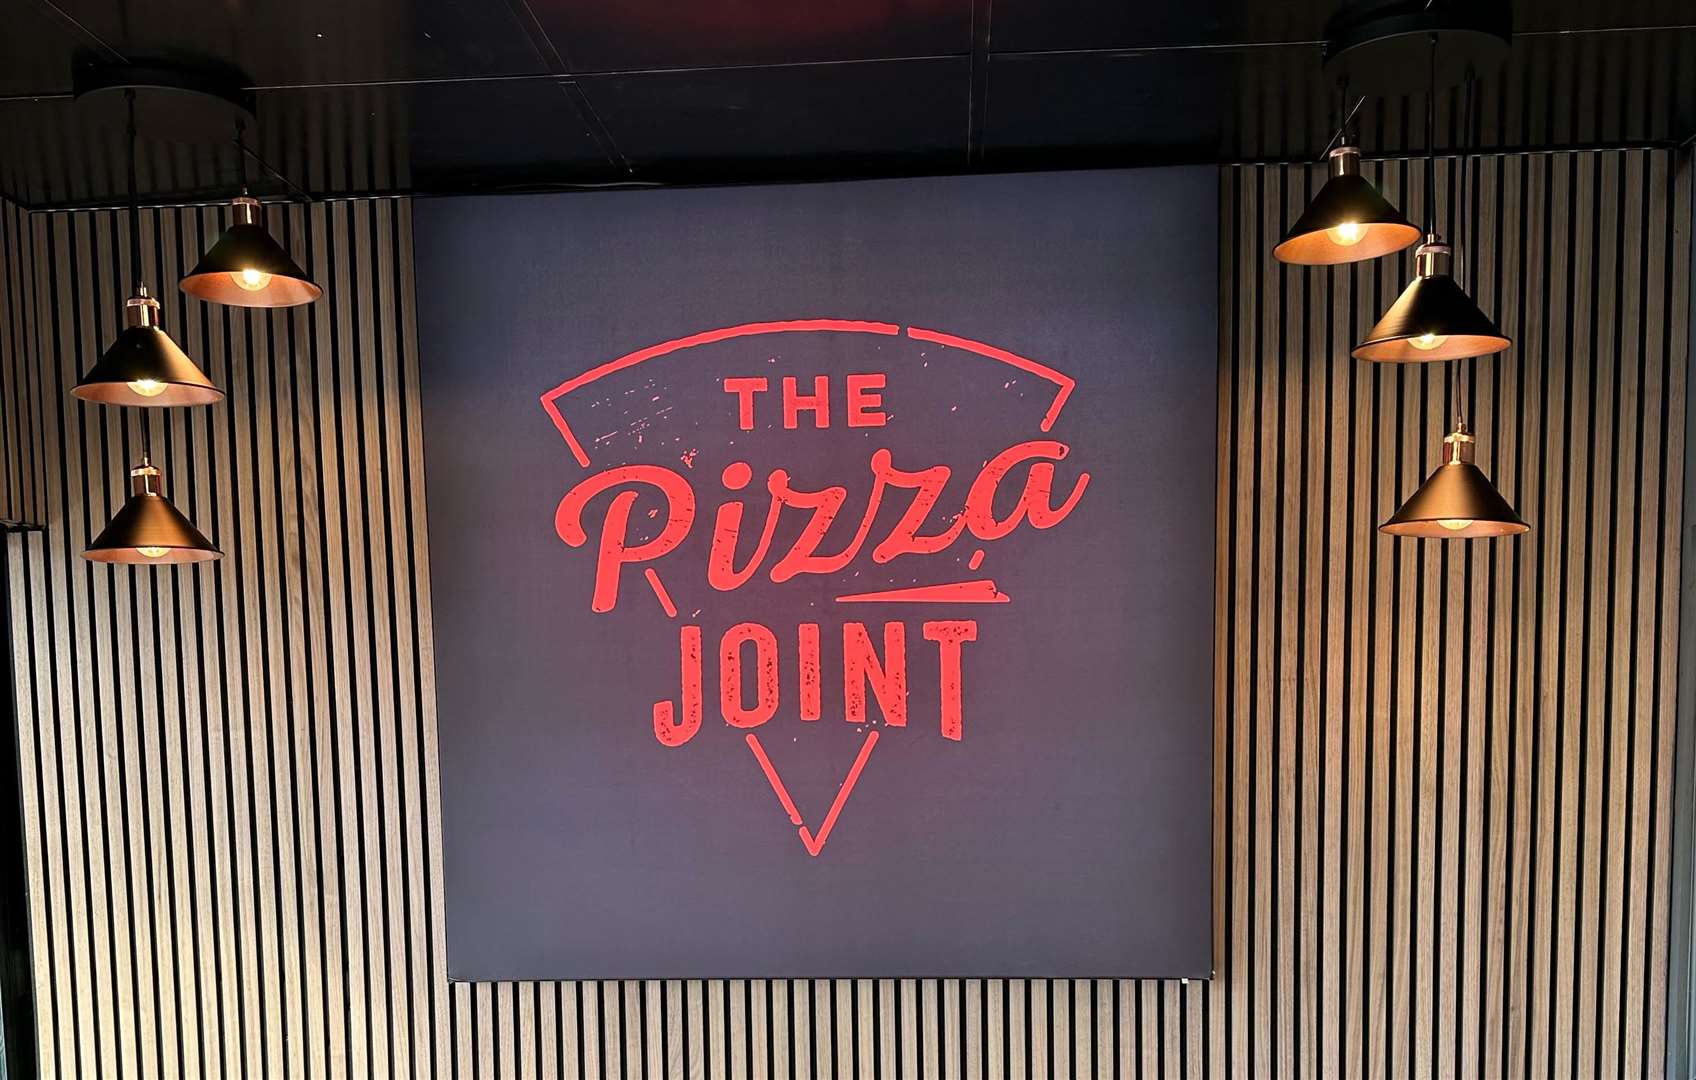 The Pizza Joint in Sittingbourne is open six days a week